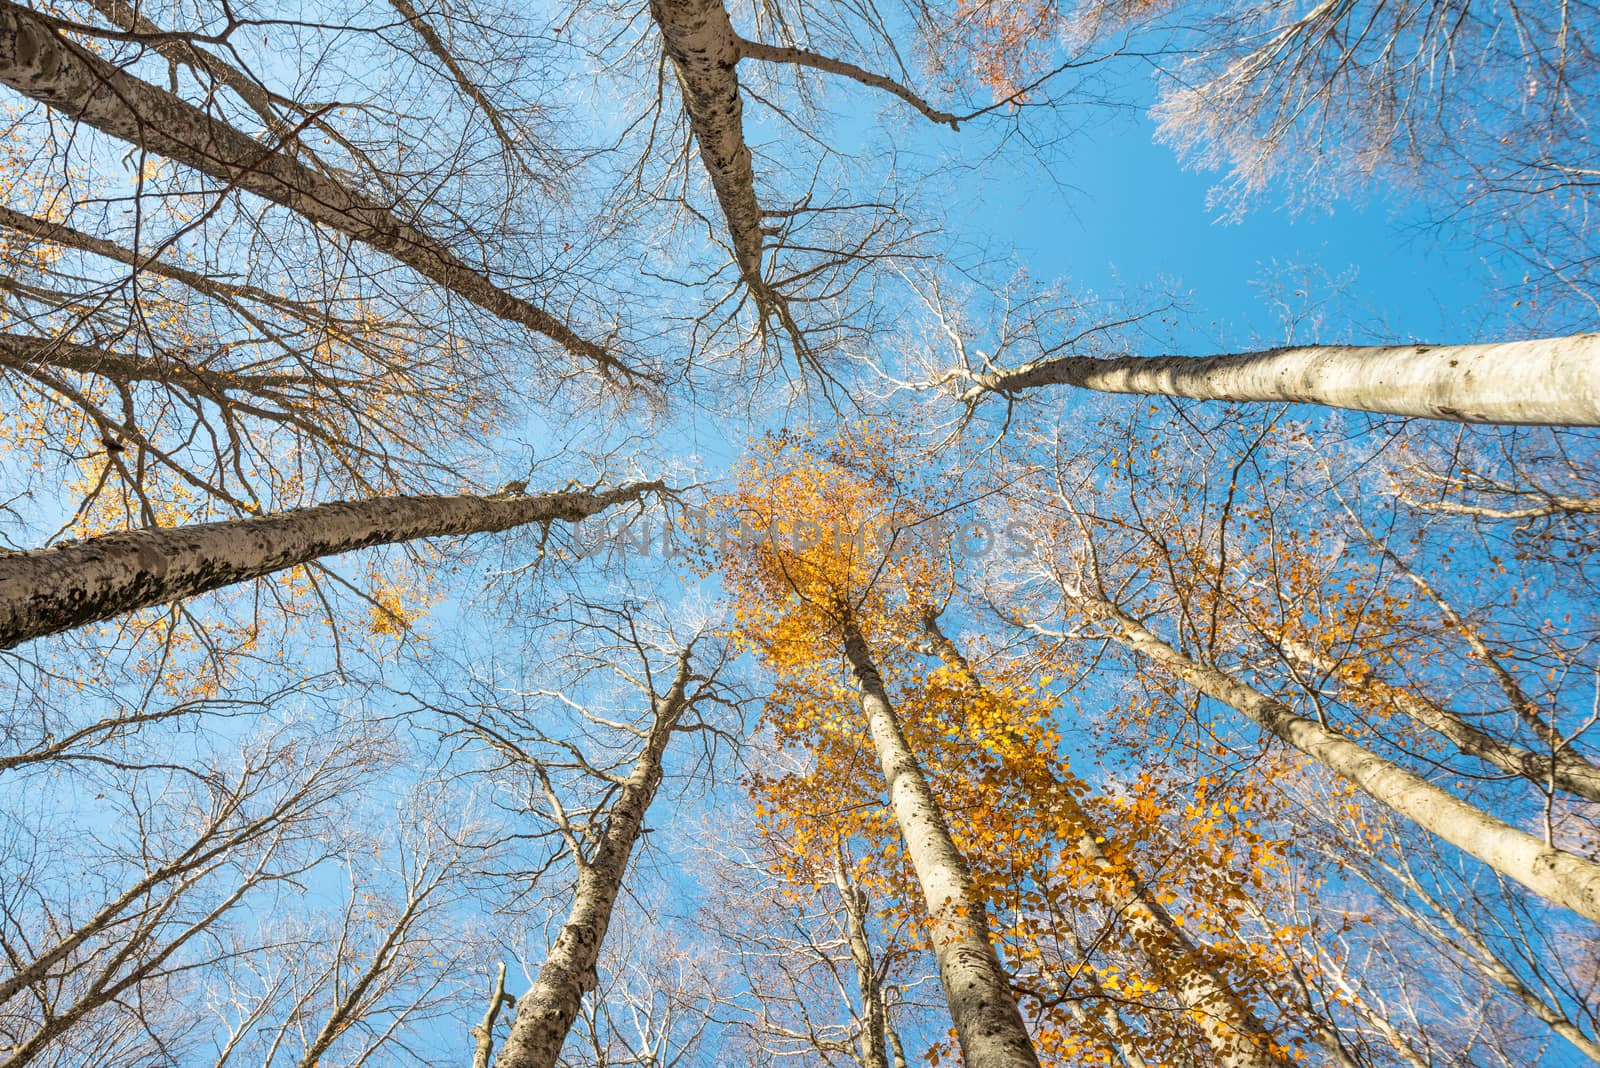 Upward perspective view of tall beech trees with colorful yellow leaves on a blue sky background